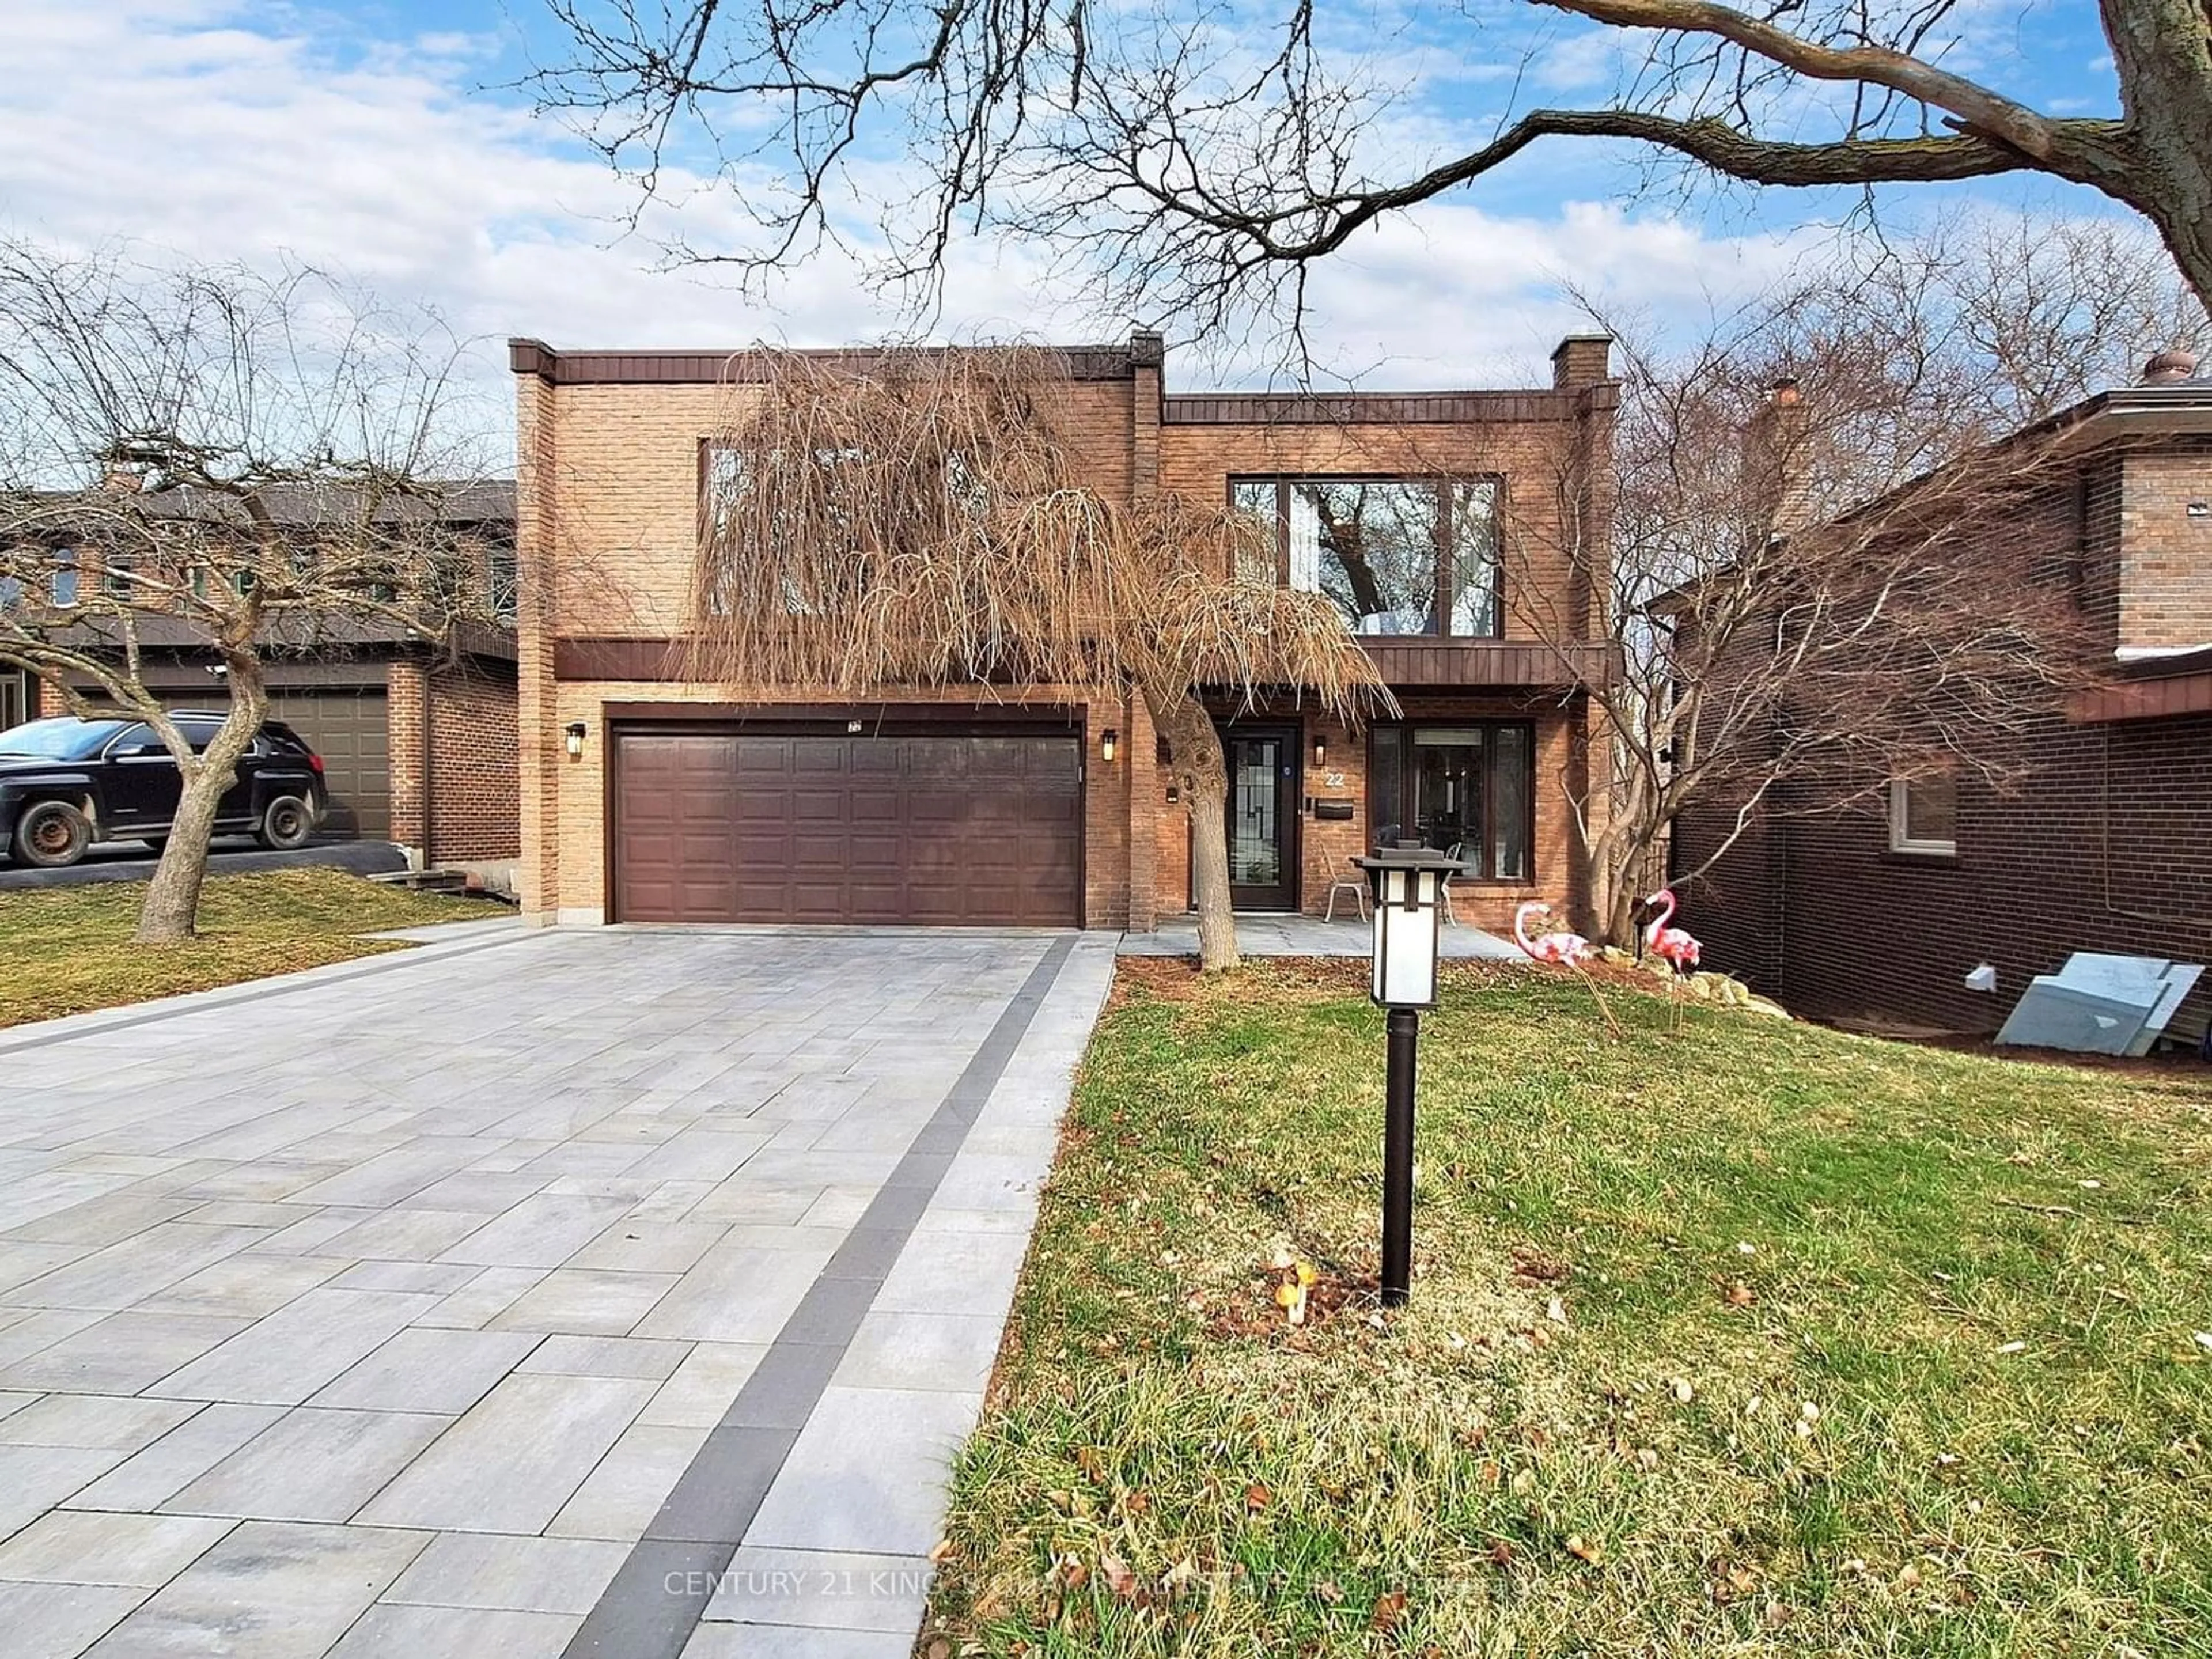 Home with brick exterior material for 22 Coreydale Crt, Toronto Ontario M3H 4T2